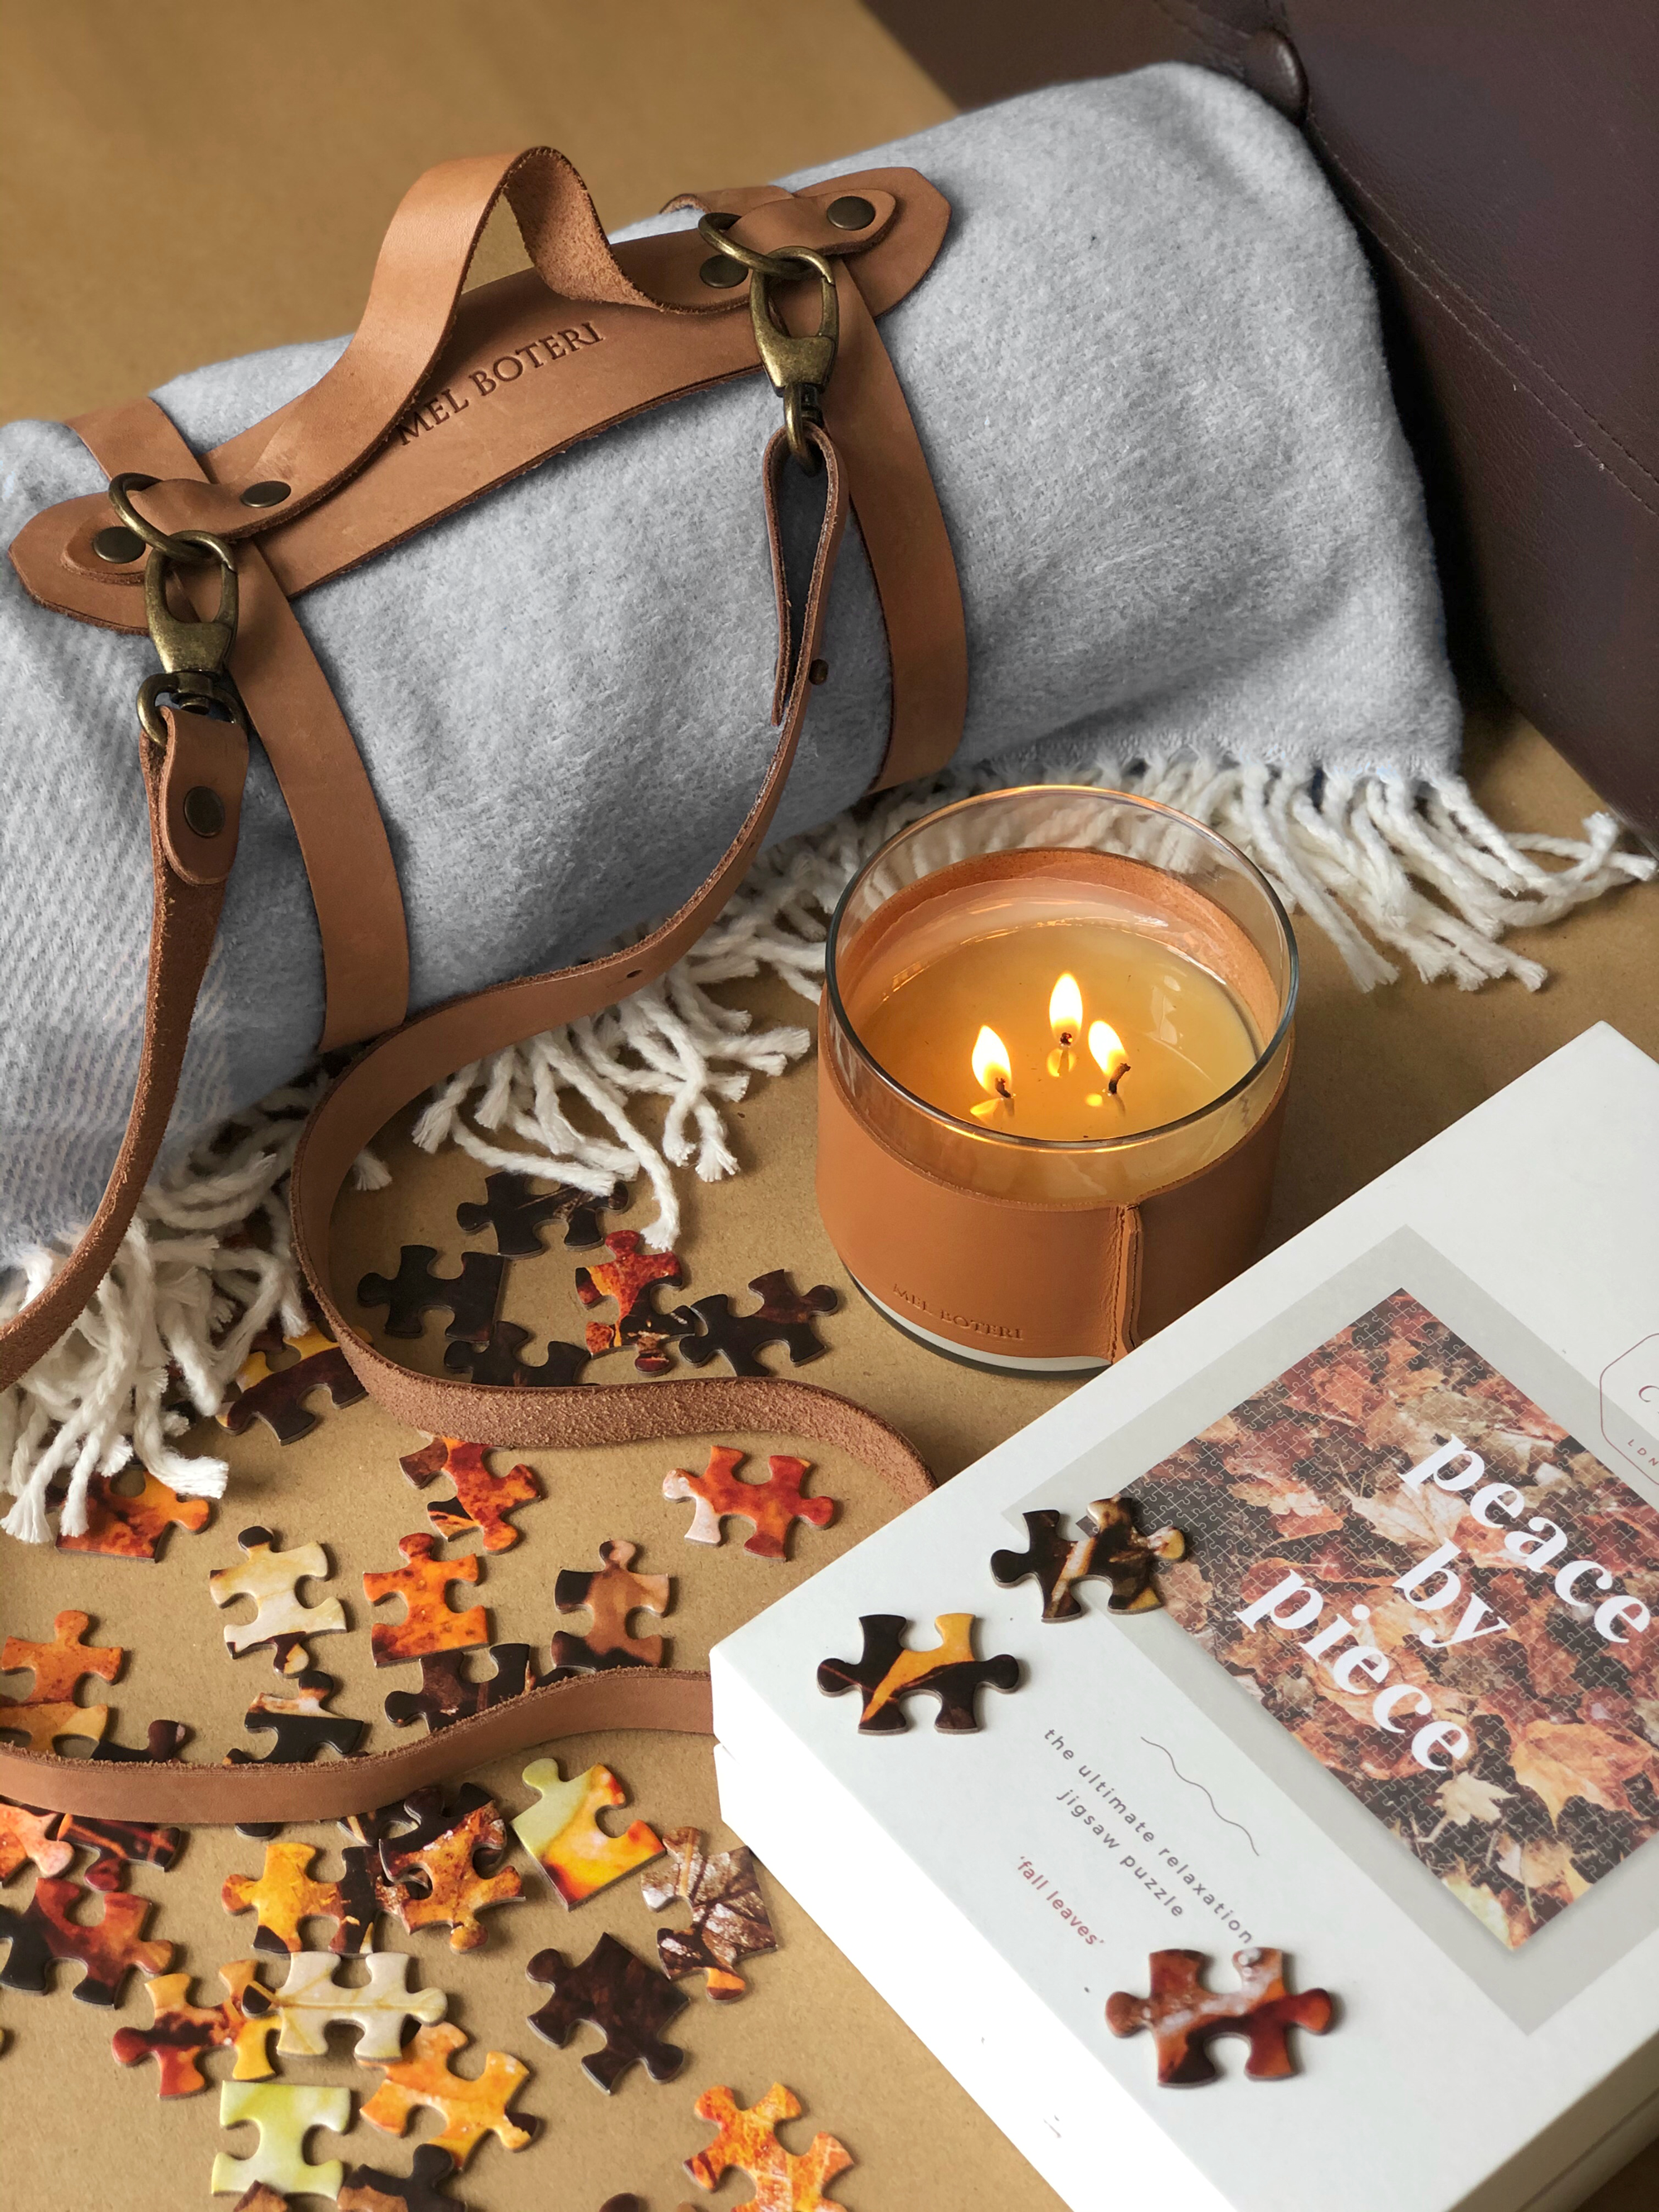 25 Professional Corporate Gift Ideas Under $100 | Mel Boteri Fashion Partners | Leather Wrapped Candle and Blanket With Leather Carrying Straps